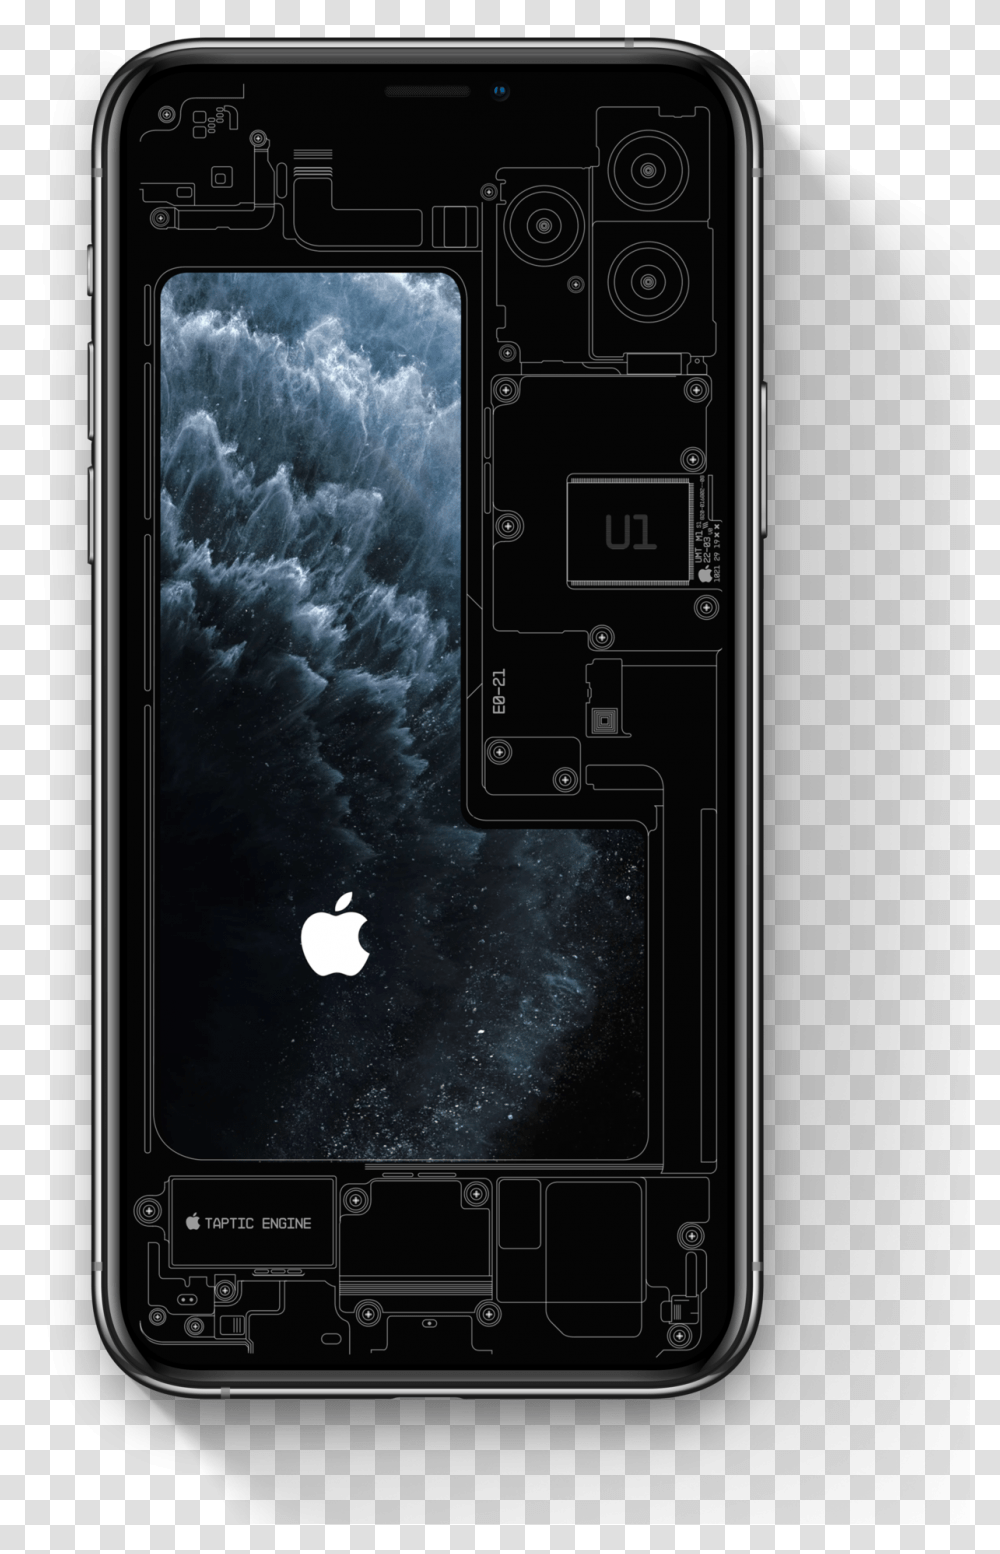 Iphone 11 Tsa Wallpaper By Vanschneider Download Cool Wallpaper Iphone, Mobile Phone, Electronics, Cell Phone Transparent Png